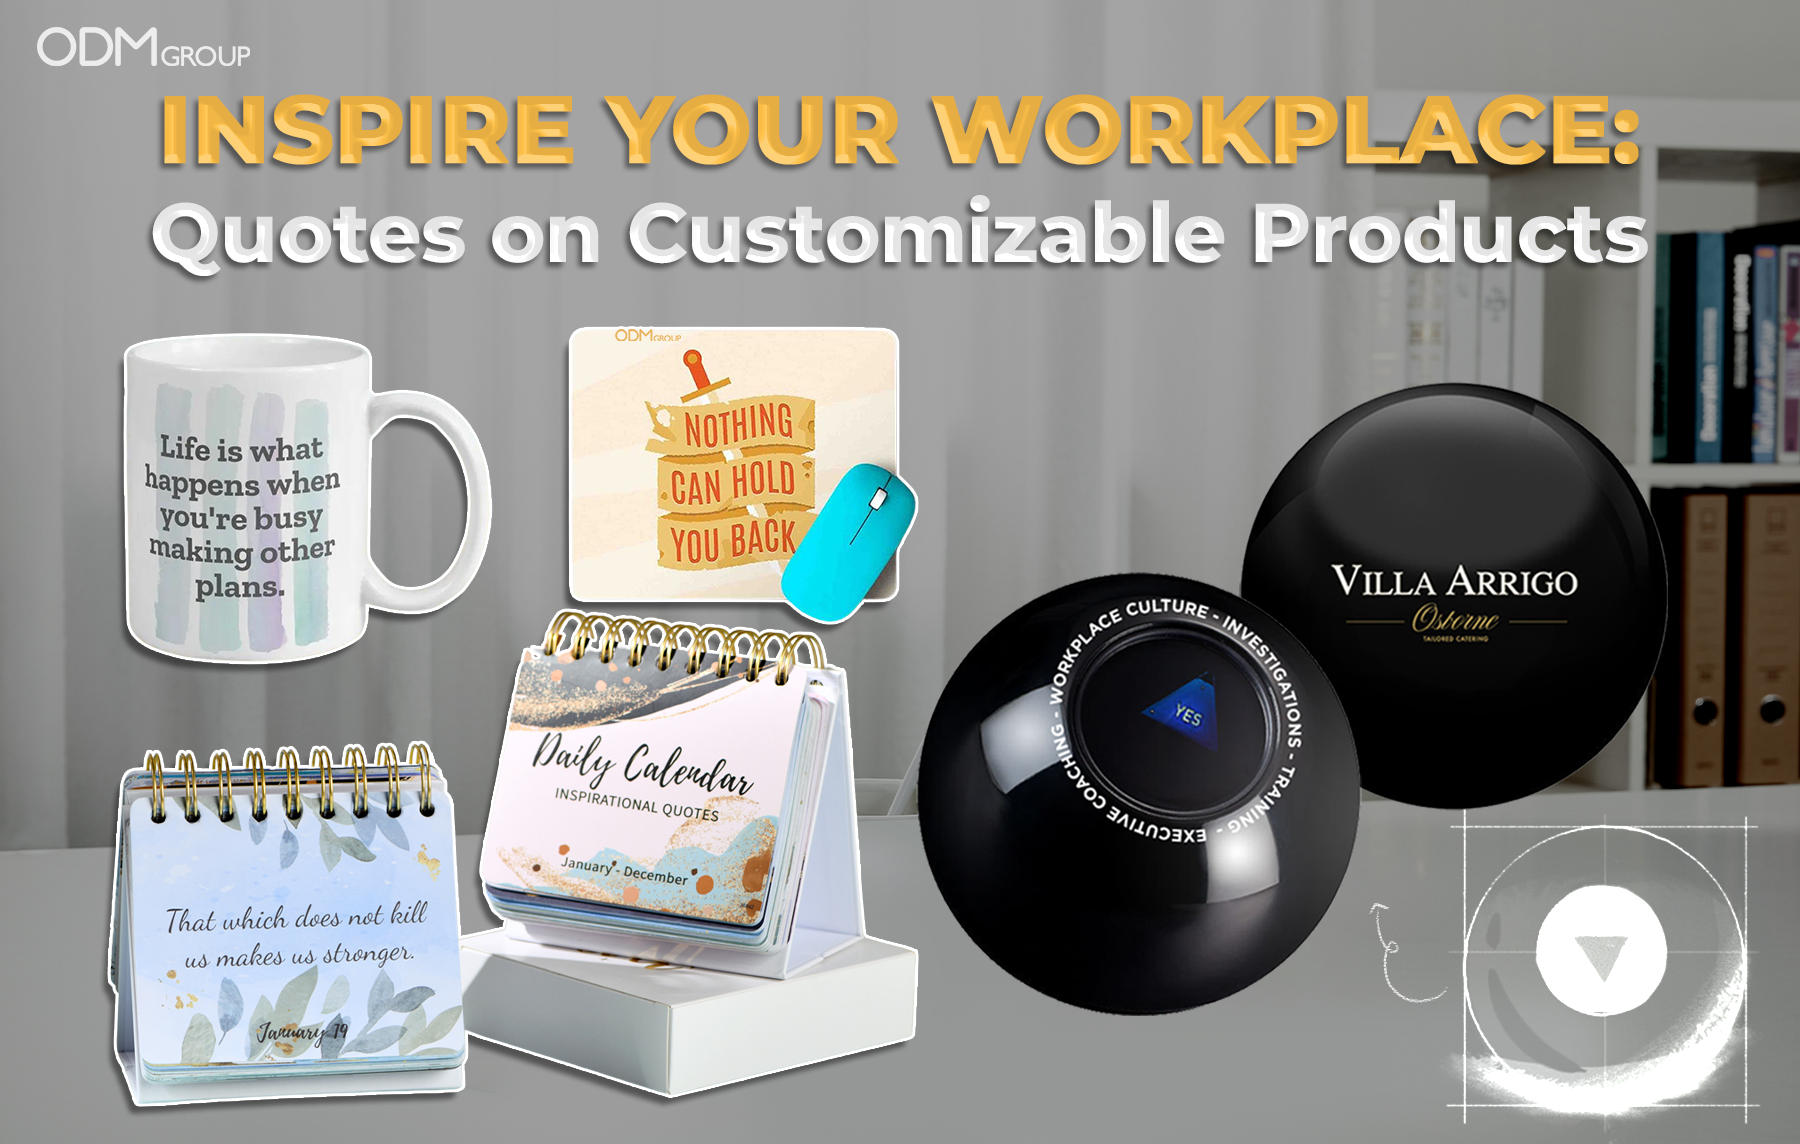 Customizable products including a mug, mouse pad, daily calendar, and more with Motivational Quotes for Employees from Managers